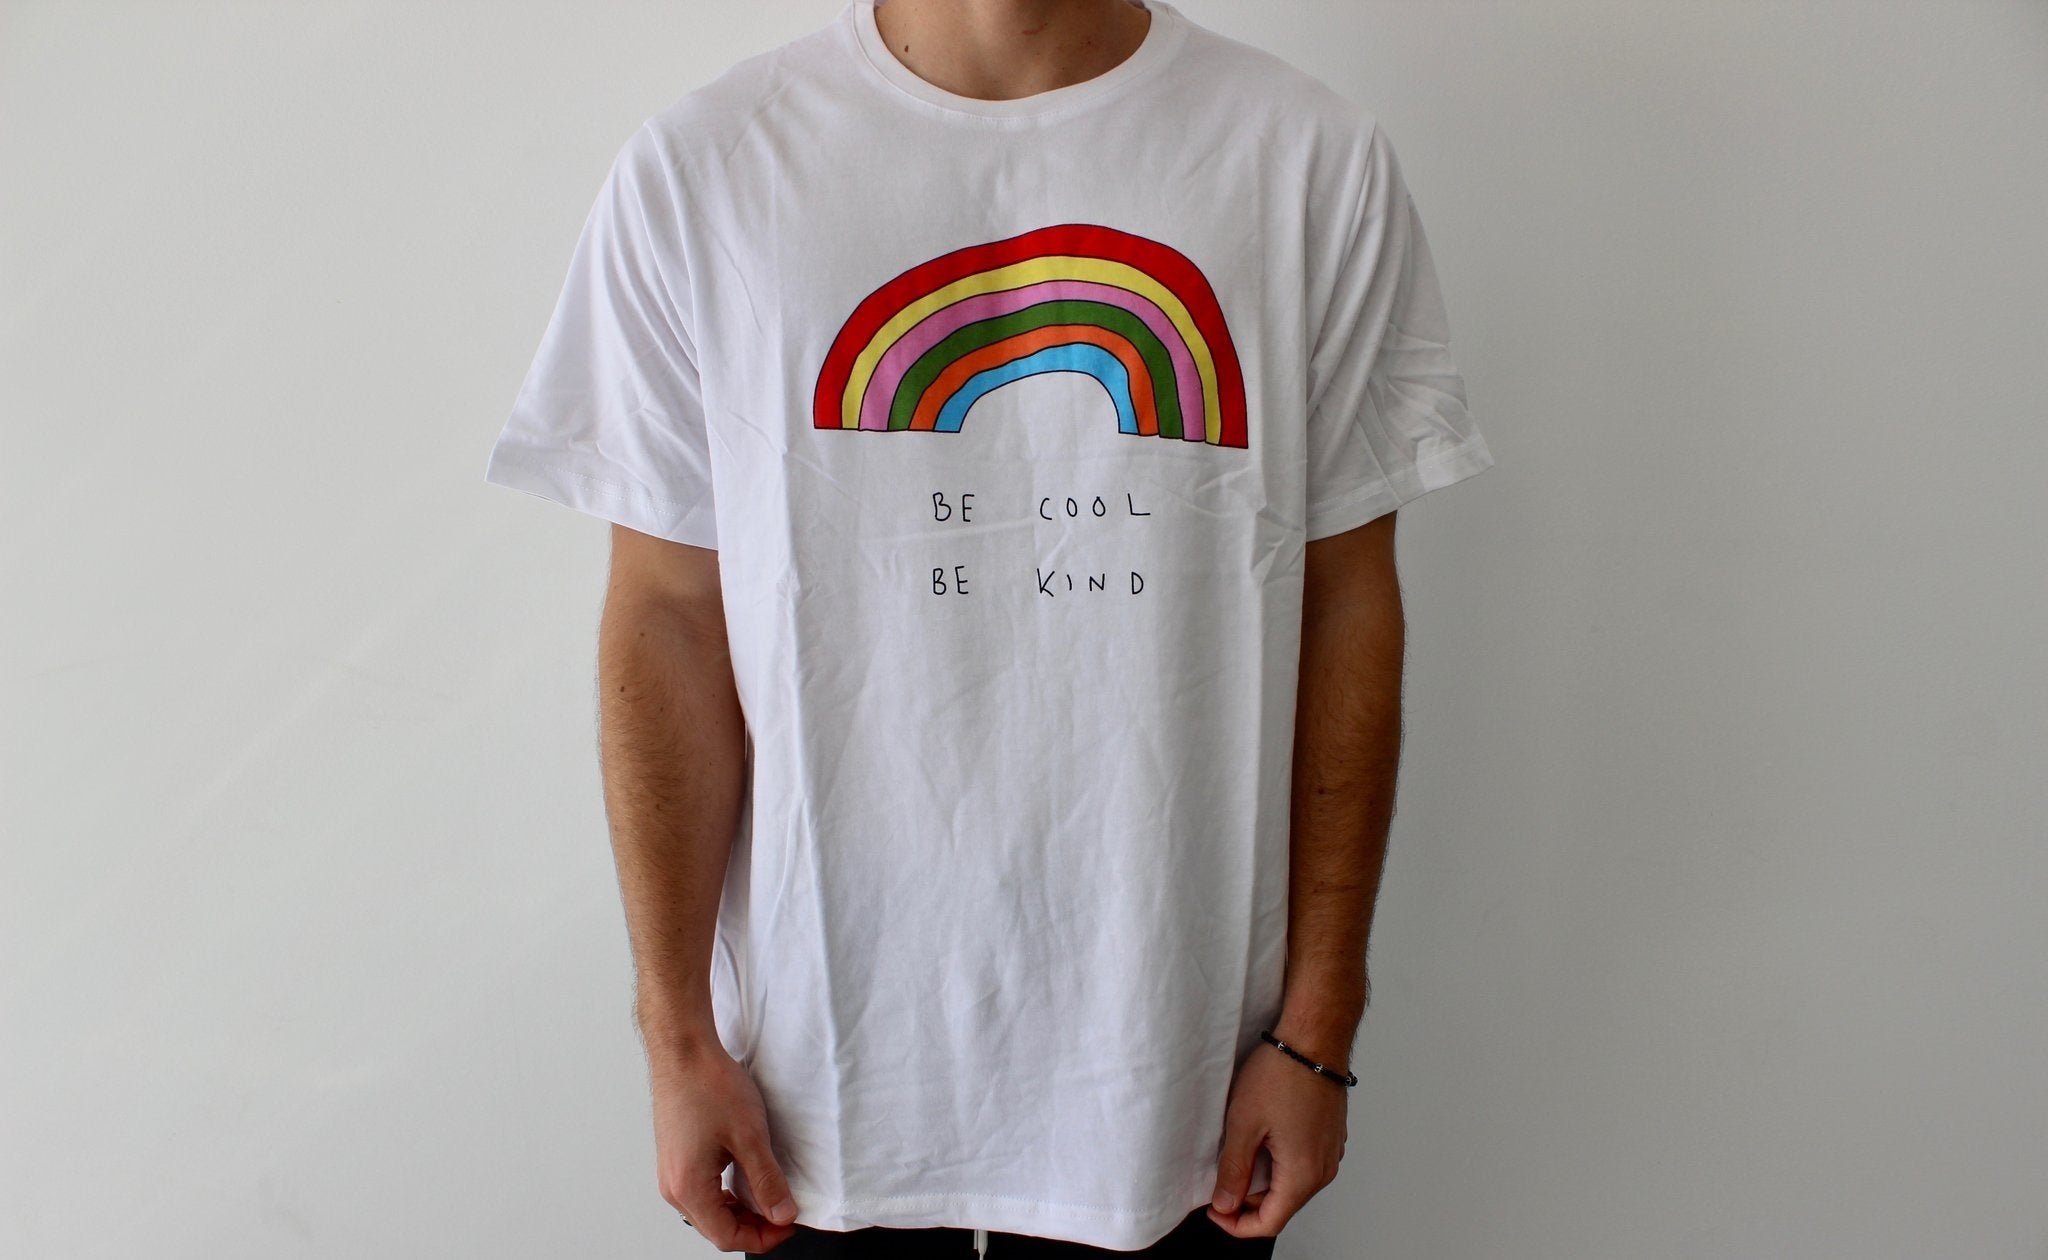 Be Cool Kind Rainbow T-Shirt - Aesthetic Clothing